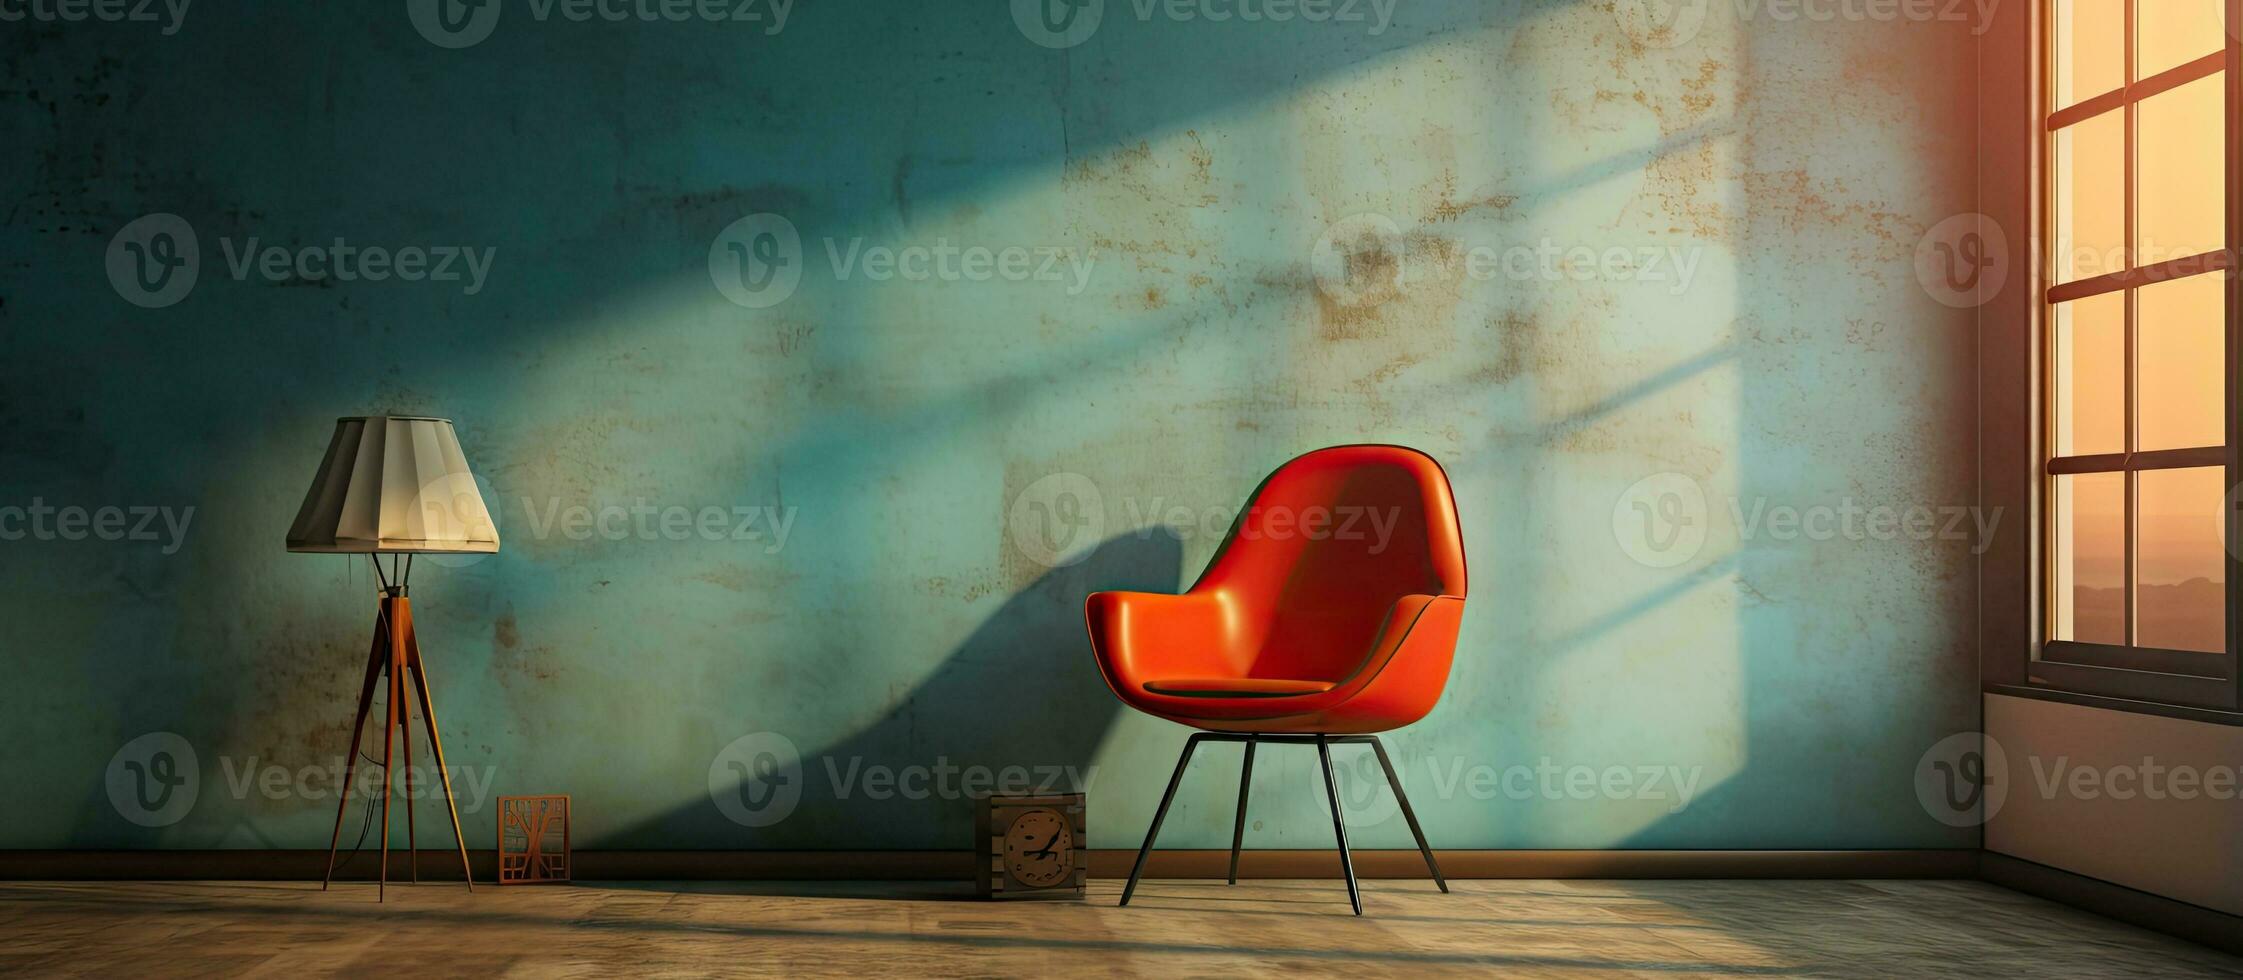 Chair in an indoor setting visualized in photo